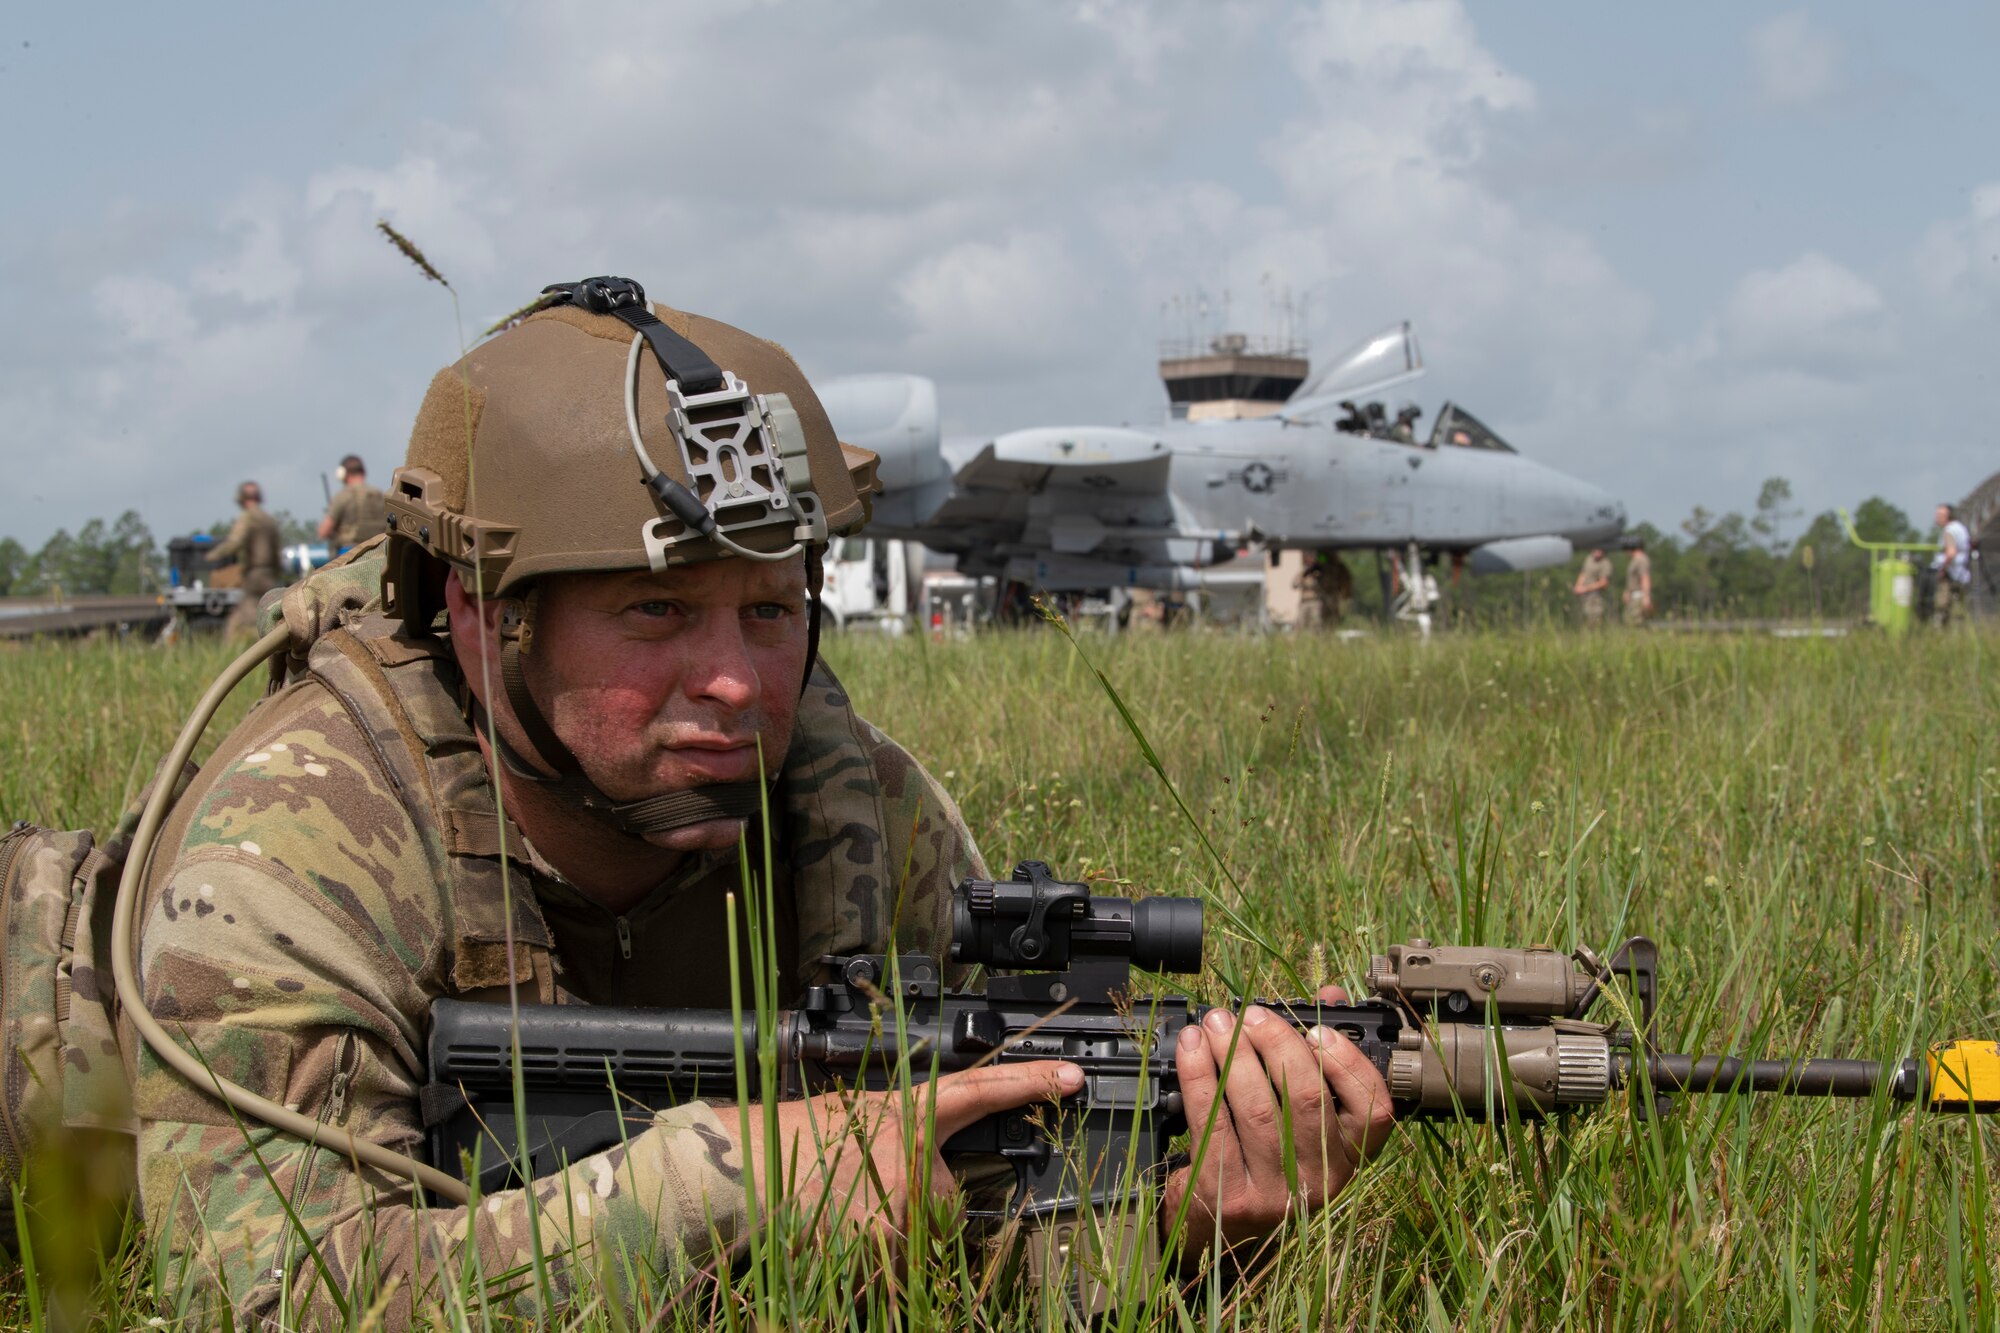 A photo of a man laying on the ground positioned with a weapon for securing the area.